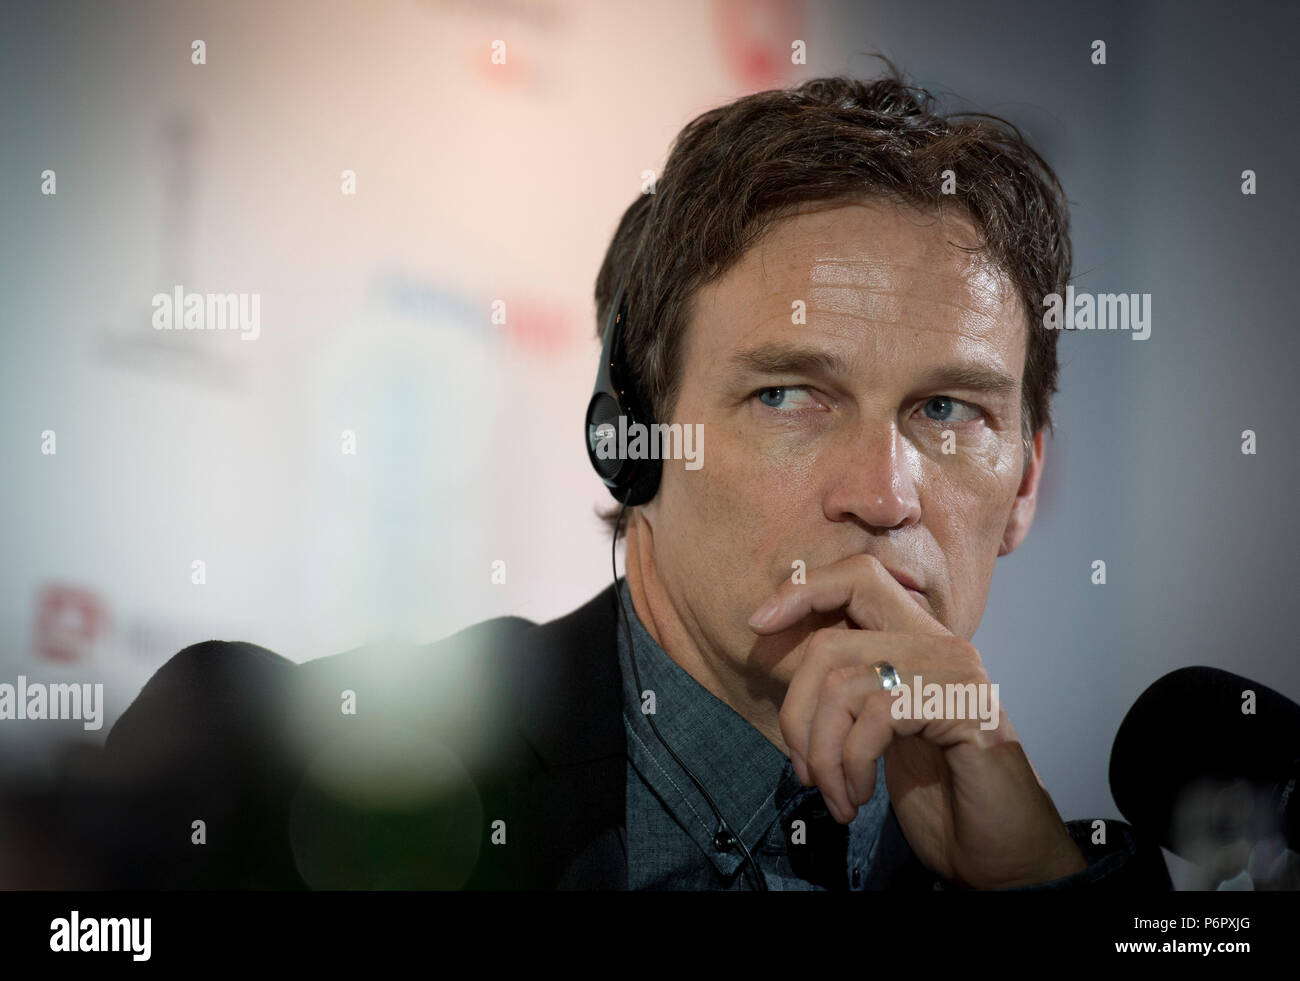 Karlovy Vary, Czech Republic. 01st July, 2018. British director Stephen Moyer attends a news conference to his film The Parting Glass at the screening in Thermal Hotel during the International Film Festival in Karlovy Vary, Czech Republic, on July 1, 2018. Credit: Katerina Sulova/CTK Photo/Alamy Live News Stock Photo